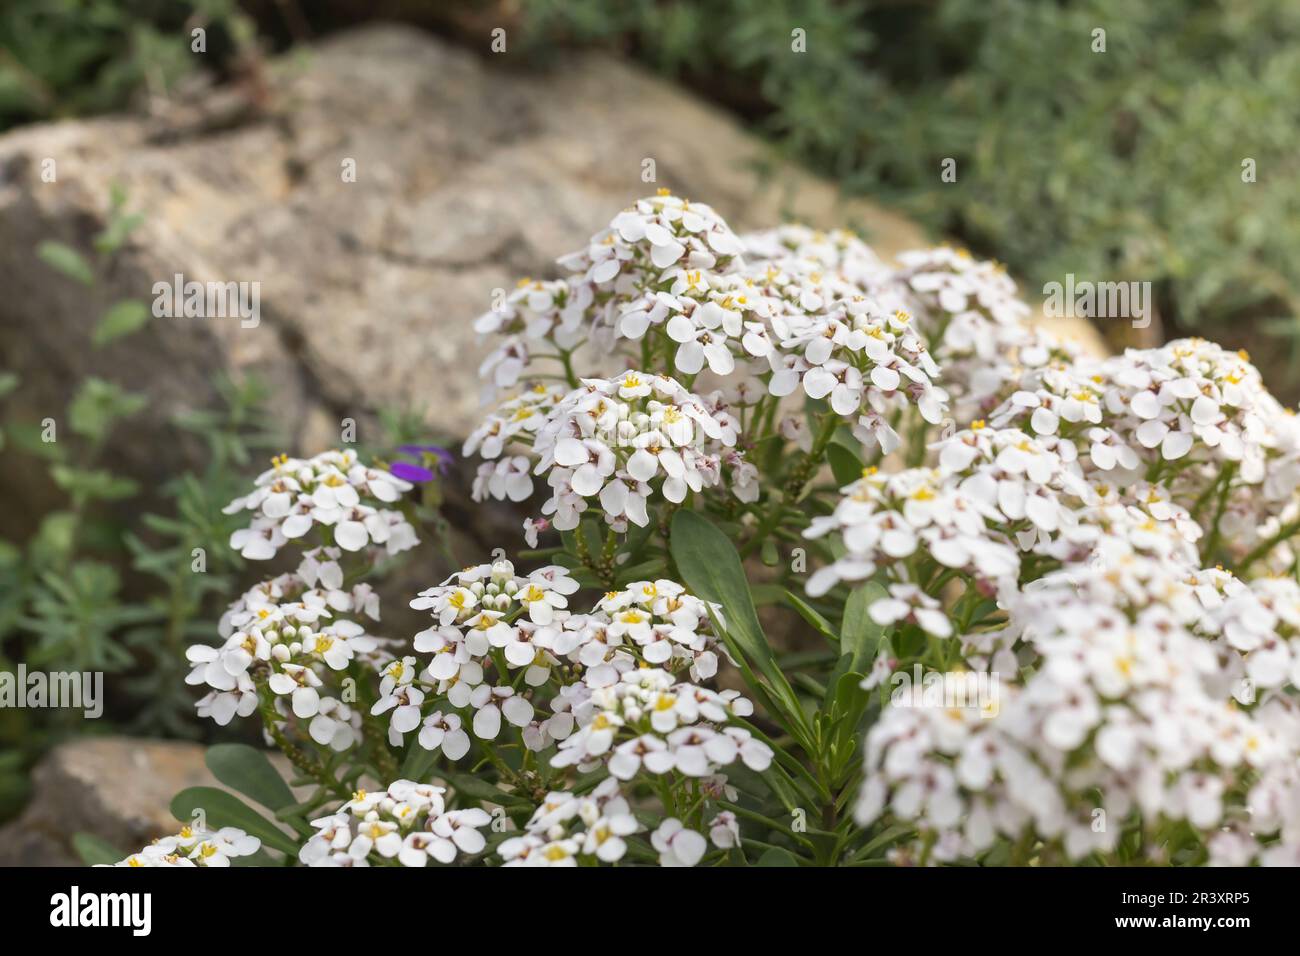 Iberis sempervirens, known as Candytuft, Evergreen candytuft, Perennial candytuft, Candy mustard Stock Photo